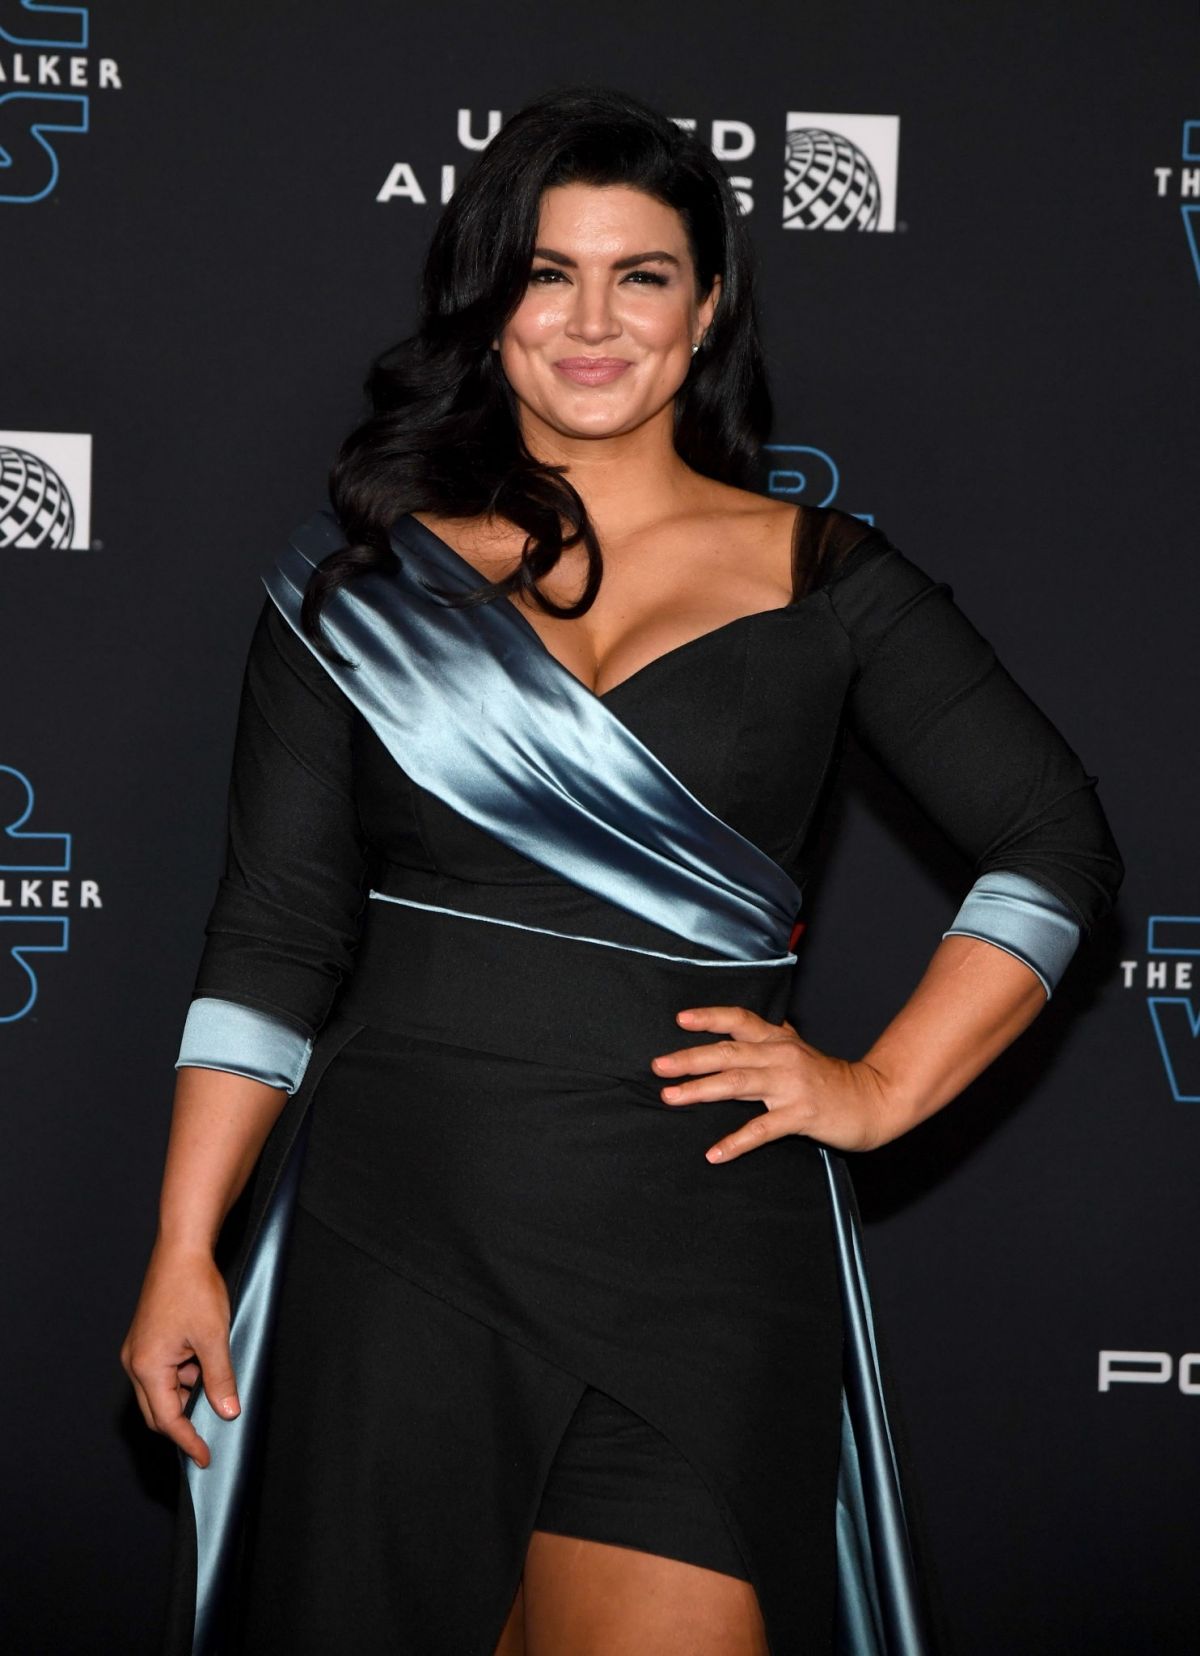 gina-carano-at-star-wars-the-rise-of-skywalker-premiere-in-los-angeles-12-16-2019-7.jpg